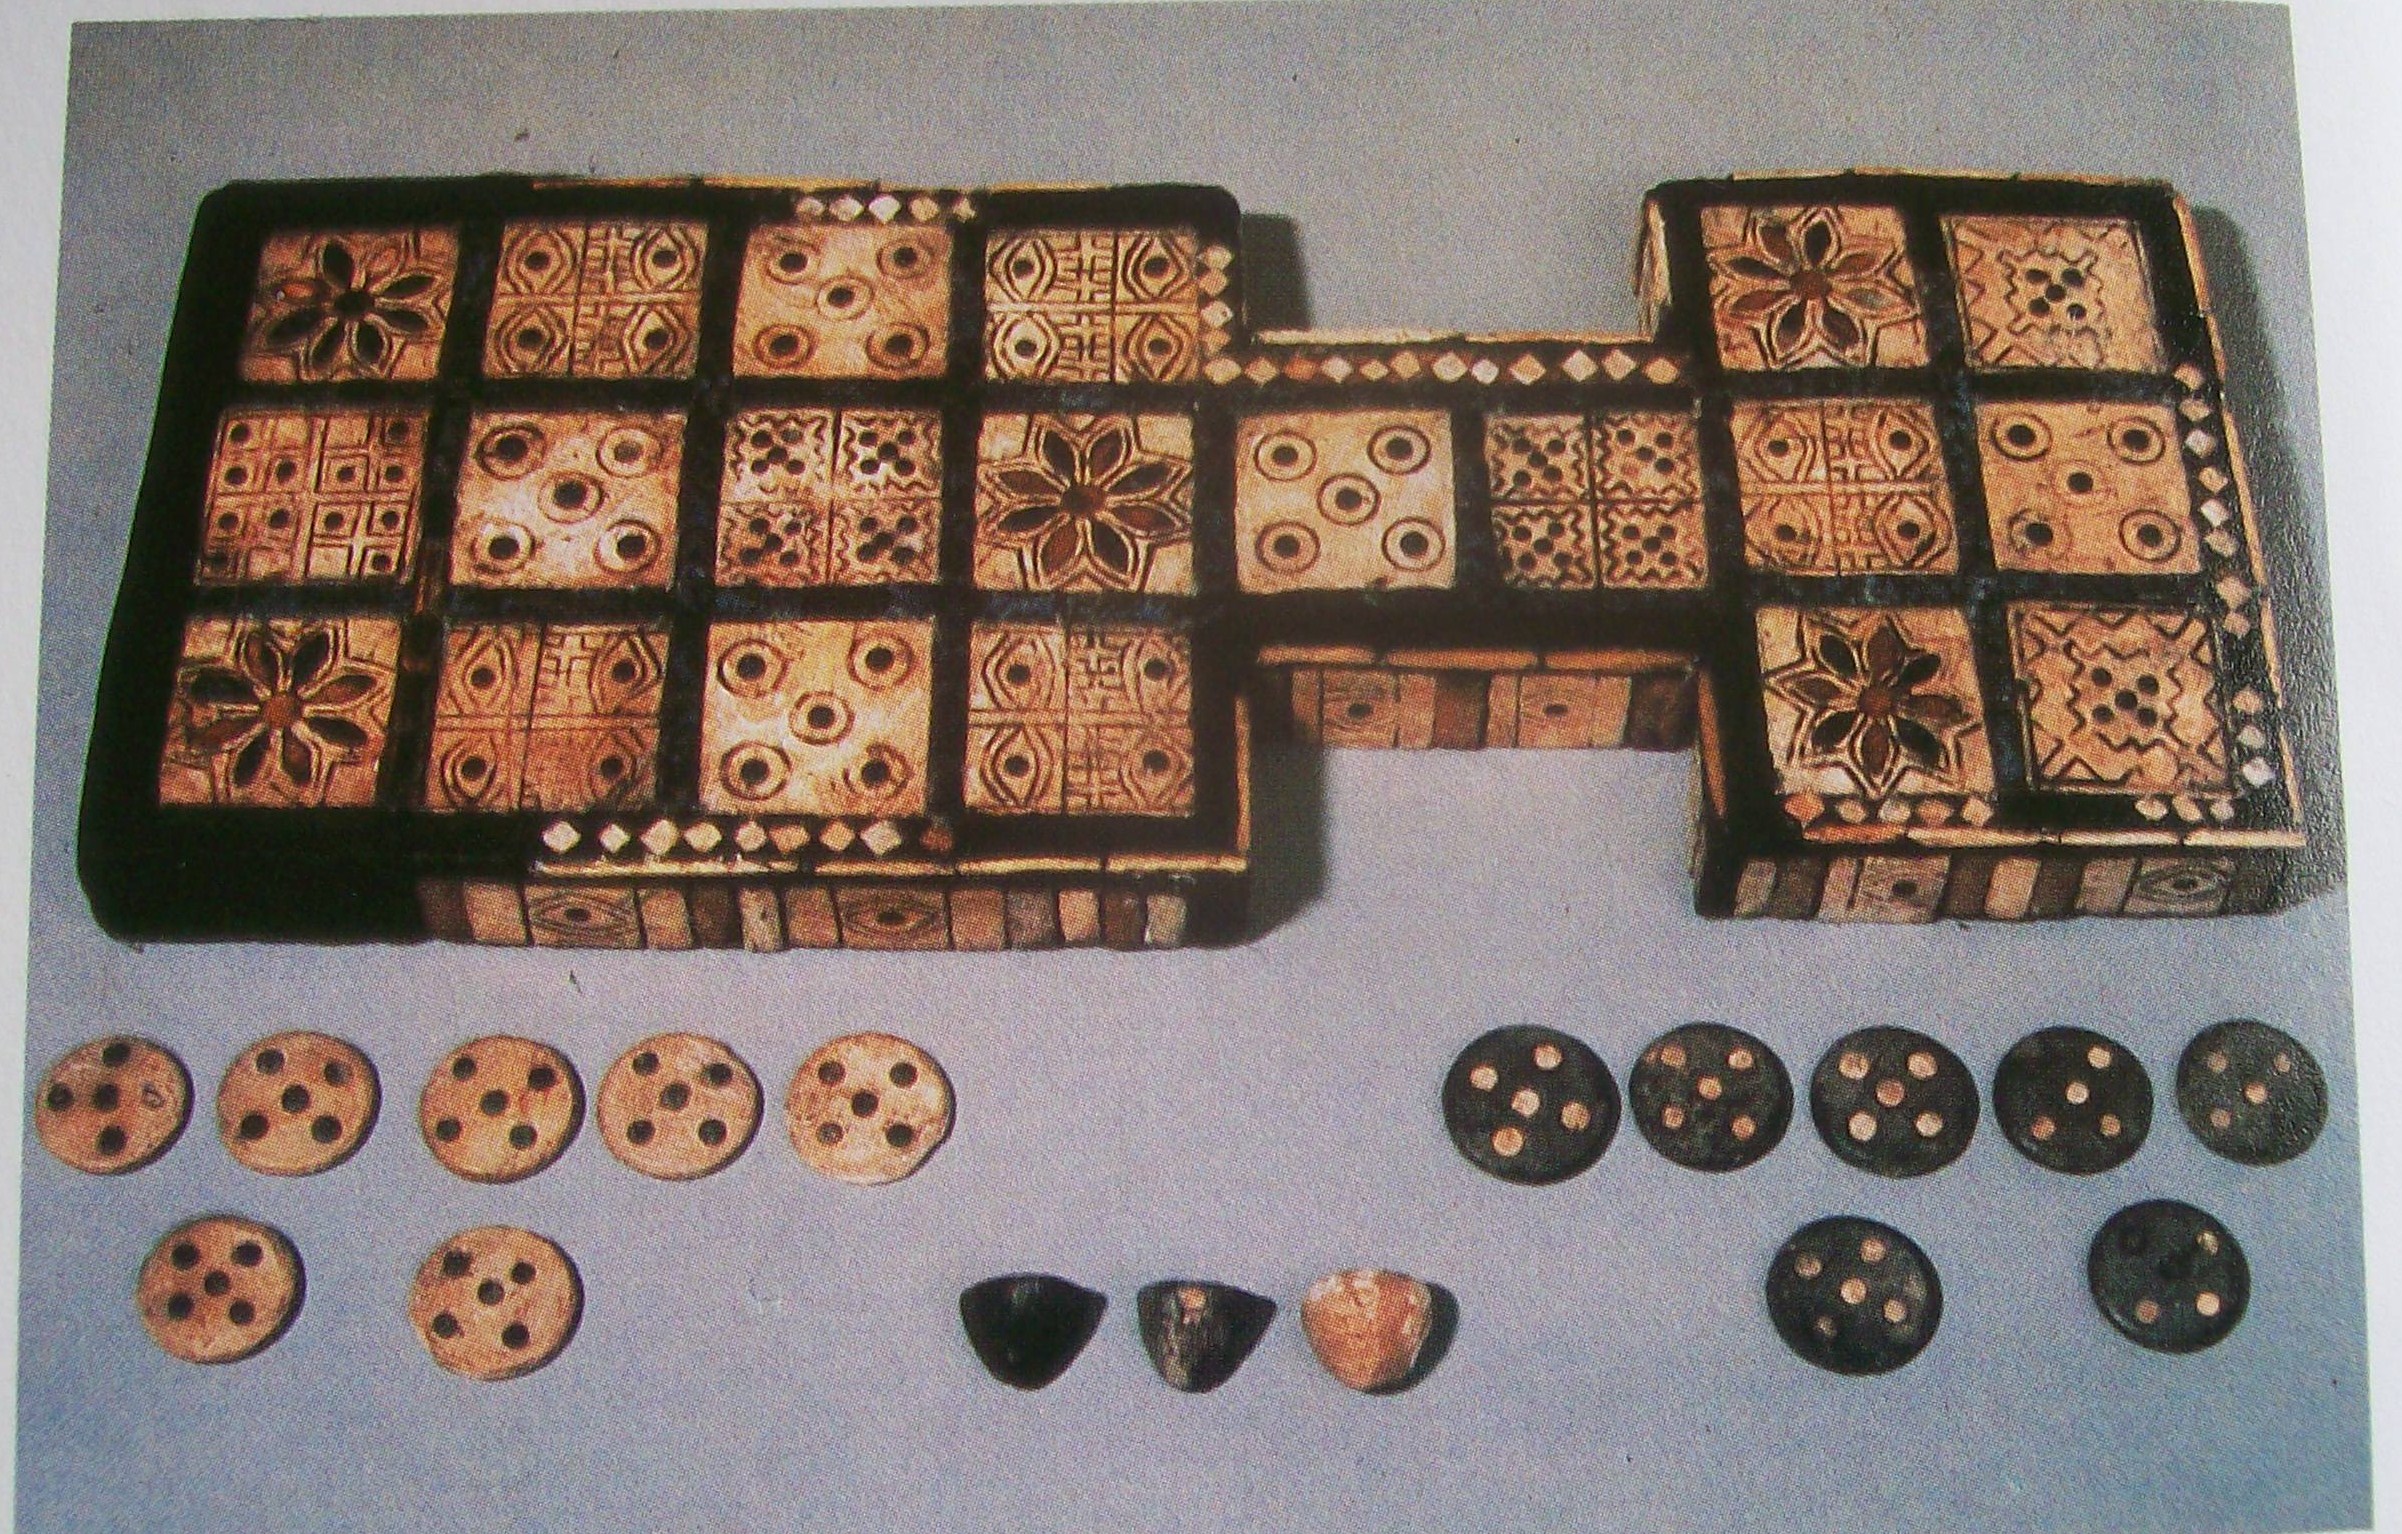 One of the Oldest Board Games: The Royal Game of Ur